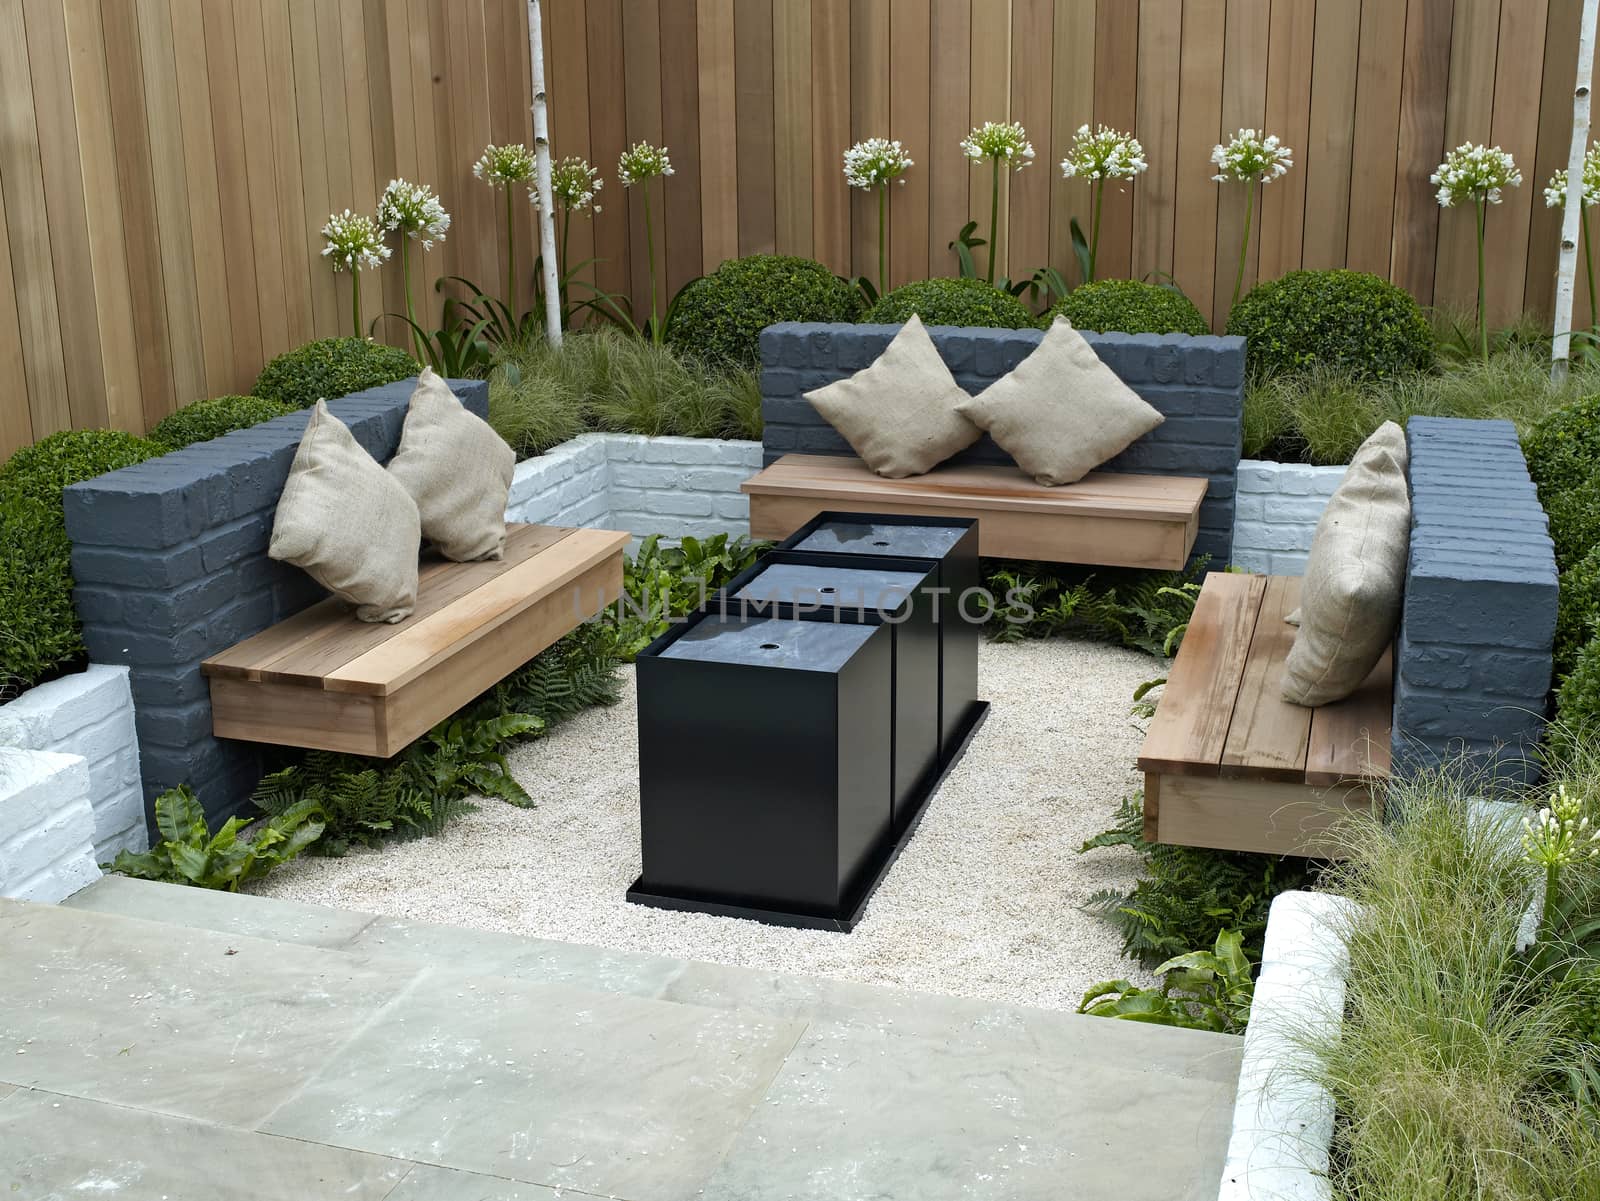 A modern lifestyle garden combining outdoor and indoor living witha sunken seating area